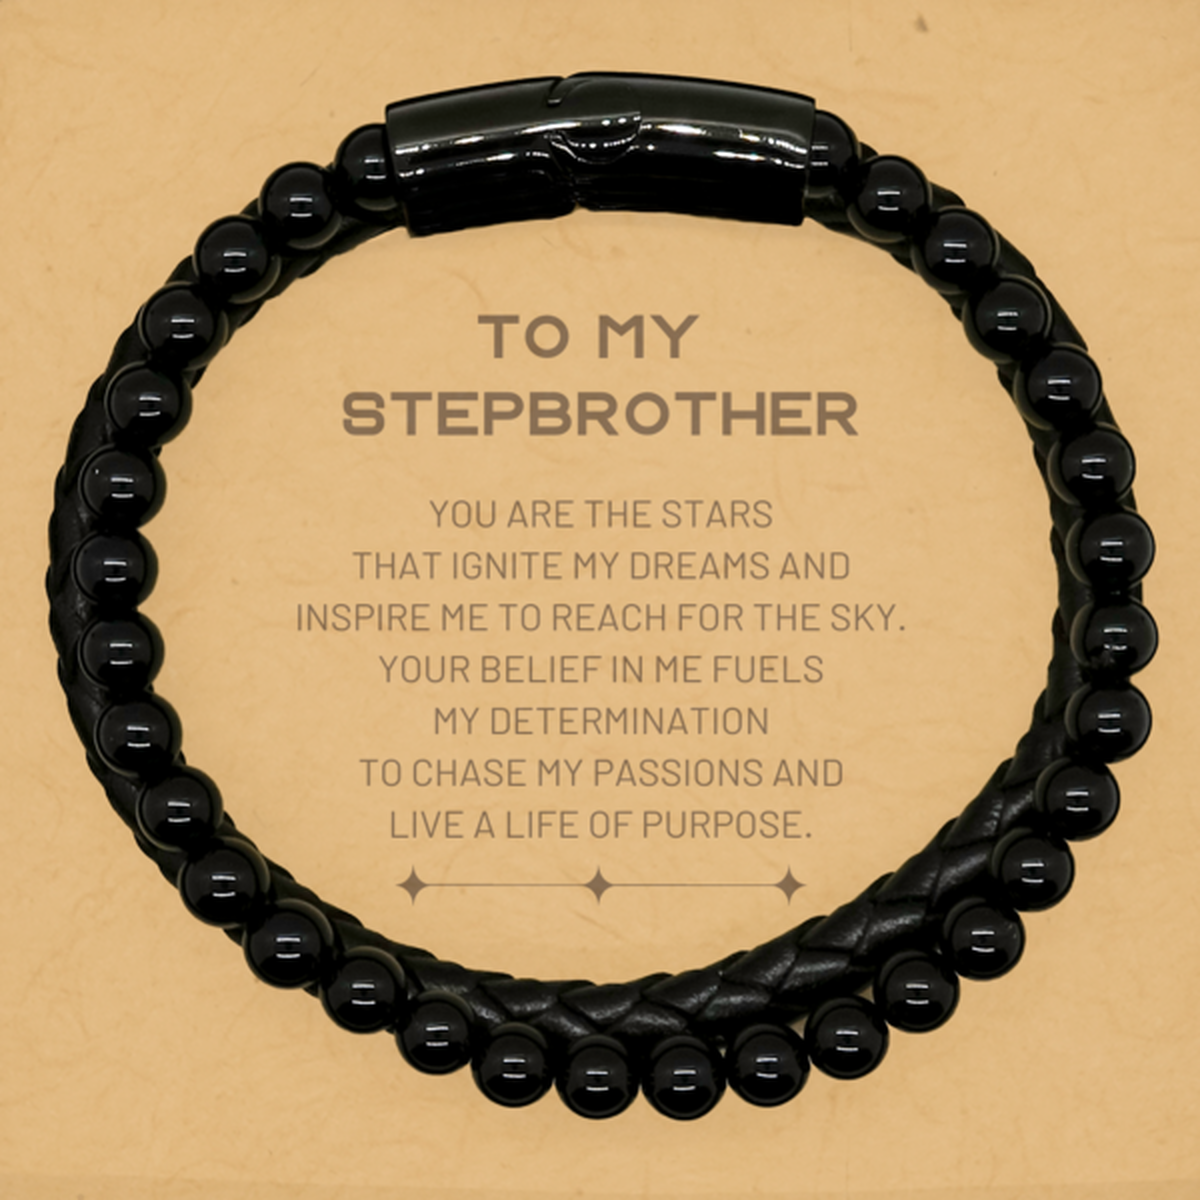 To My Stepbrother Stone Leather Bracelets, You are the stars that ignite my dreams and inspire me to reach for the sky, Birthday Unique Gifts For Stepbrother, Thank You Gifts For Stepbrother